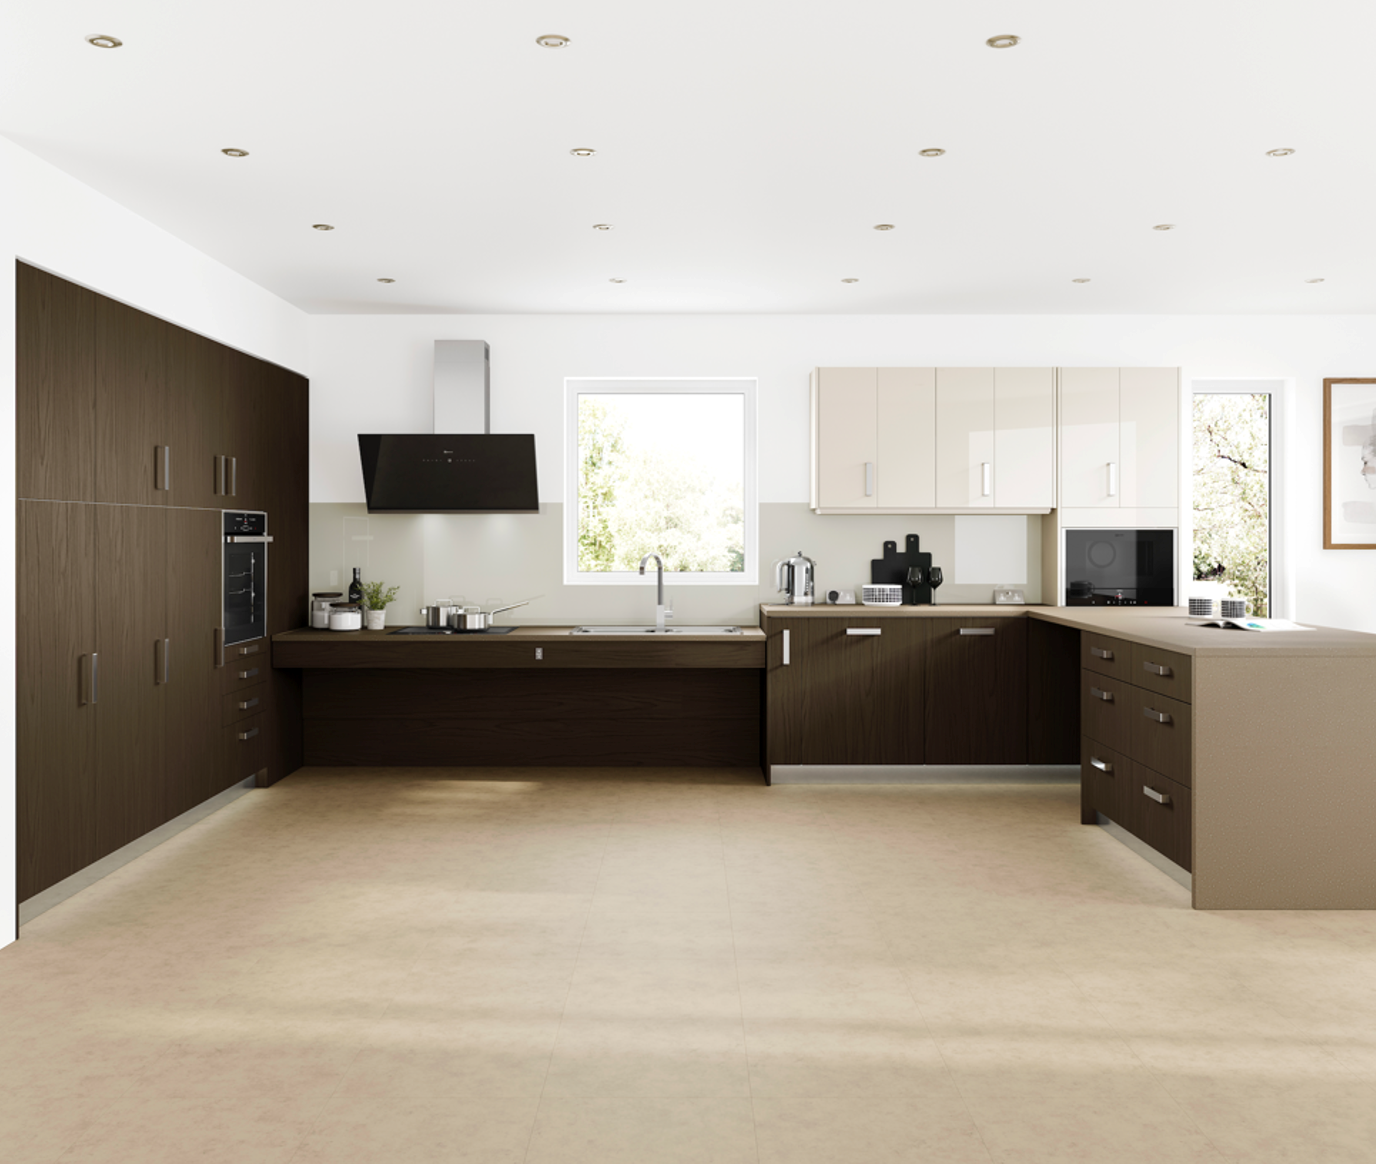 The Freedom Kitchen Collection by Symphony – Leading the Way in Accessible Design @symphonygroup